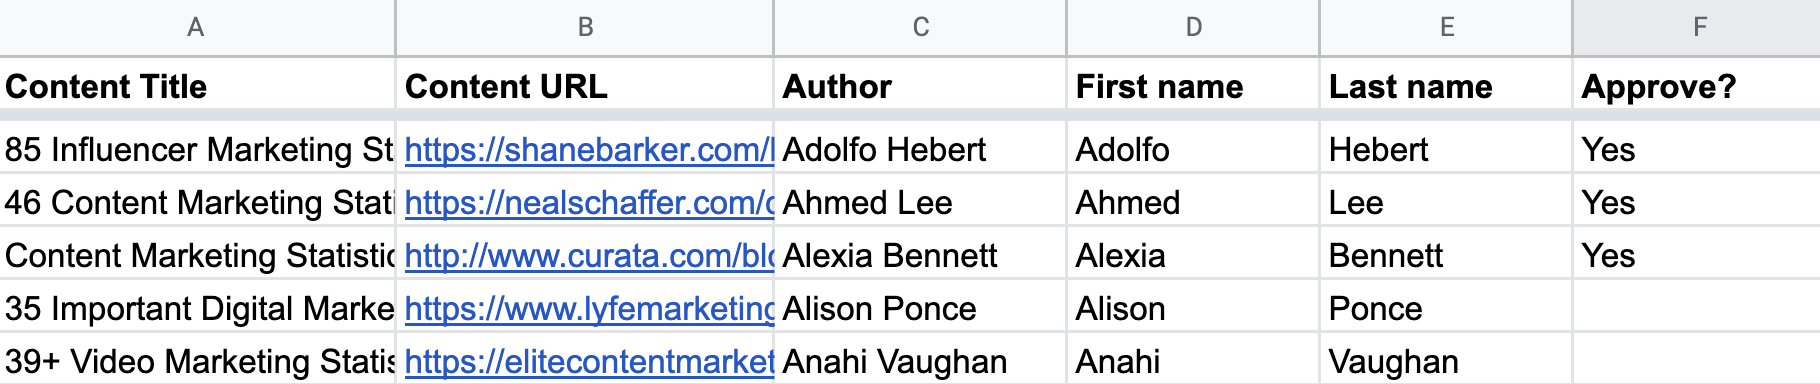 Adding of the word "Yes?" to the "Approve?" column in the Google Sheets list of prospects